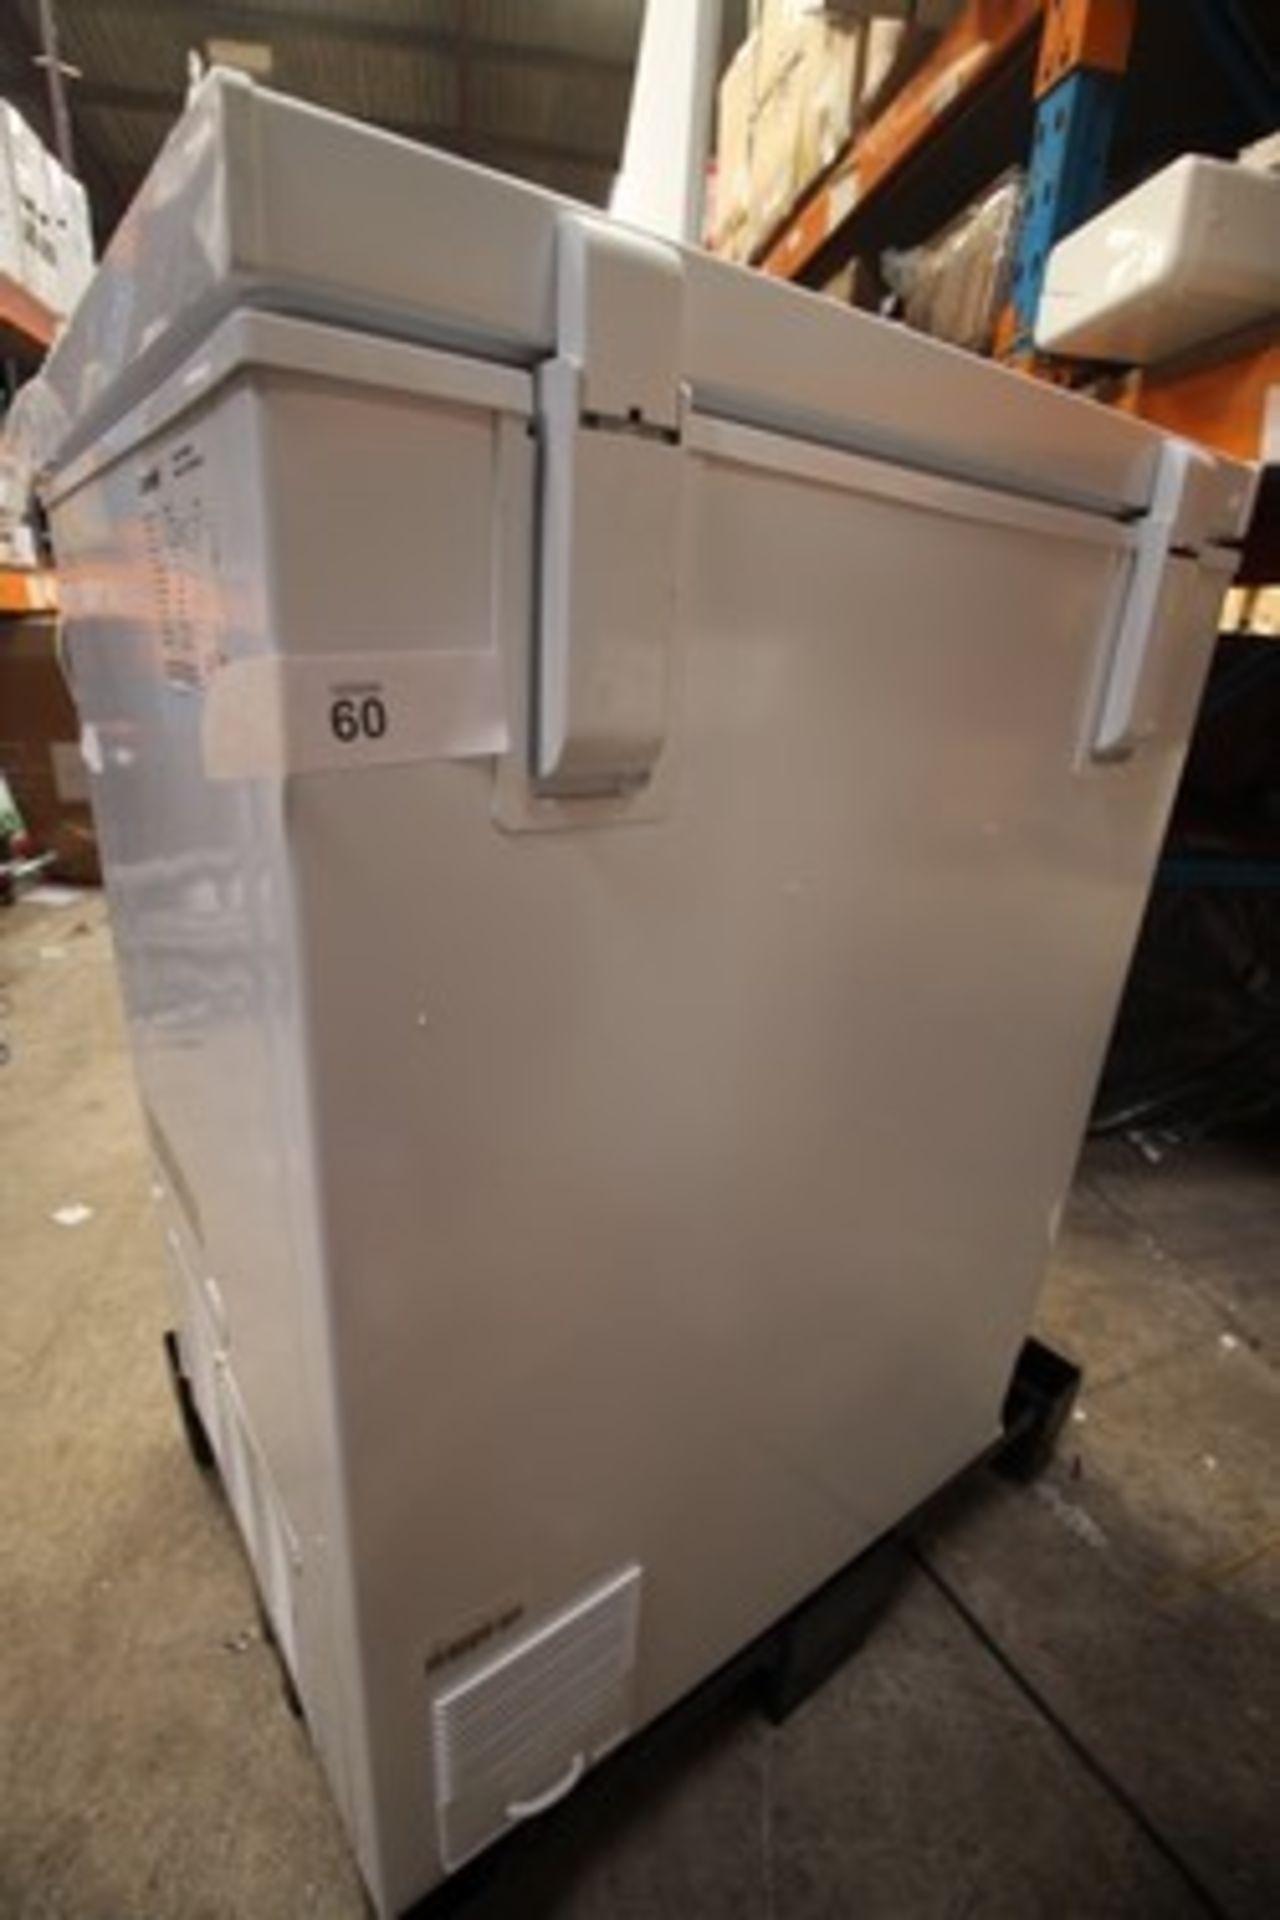 1 x Comfee chest freezer, Model 483RCC143WH, split inside edge of door, dented to front corner and - Image 4 of 4